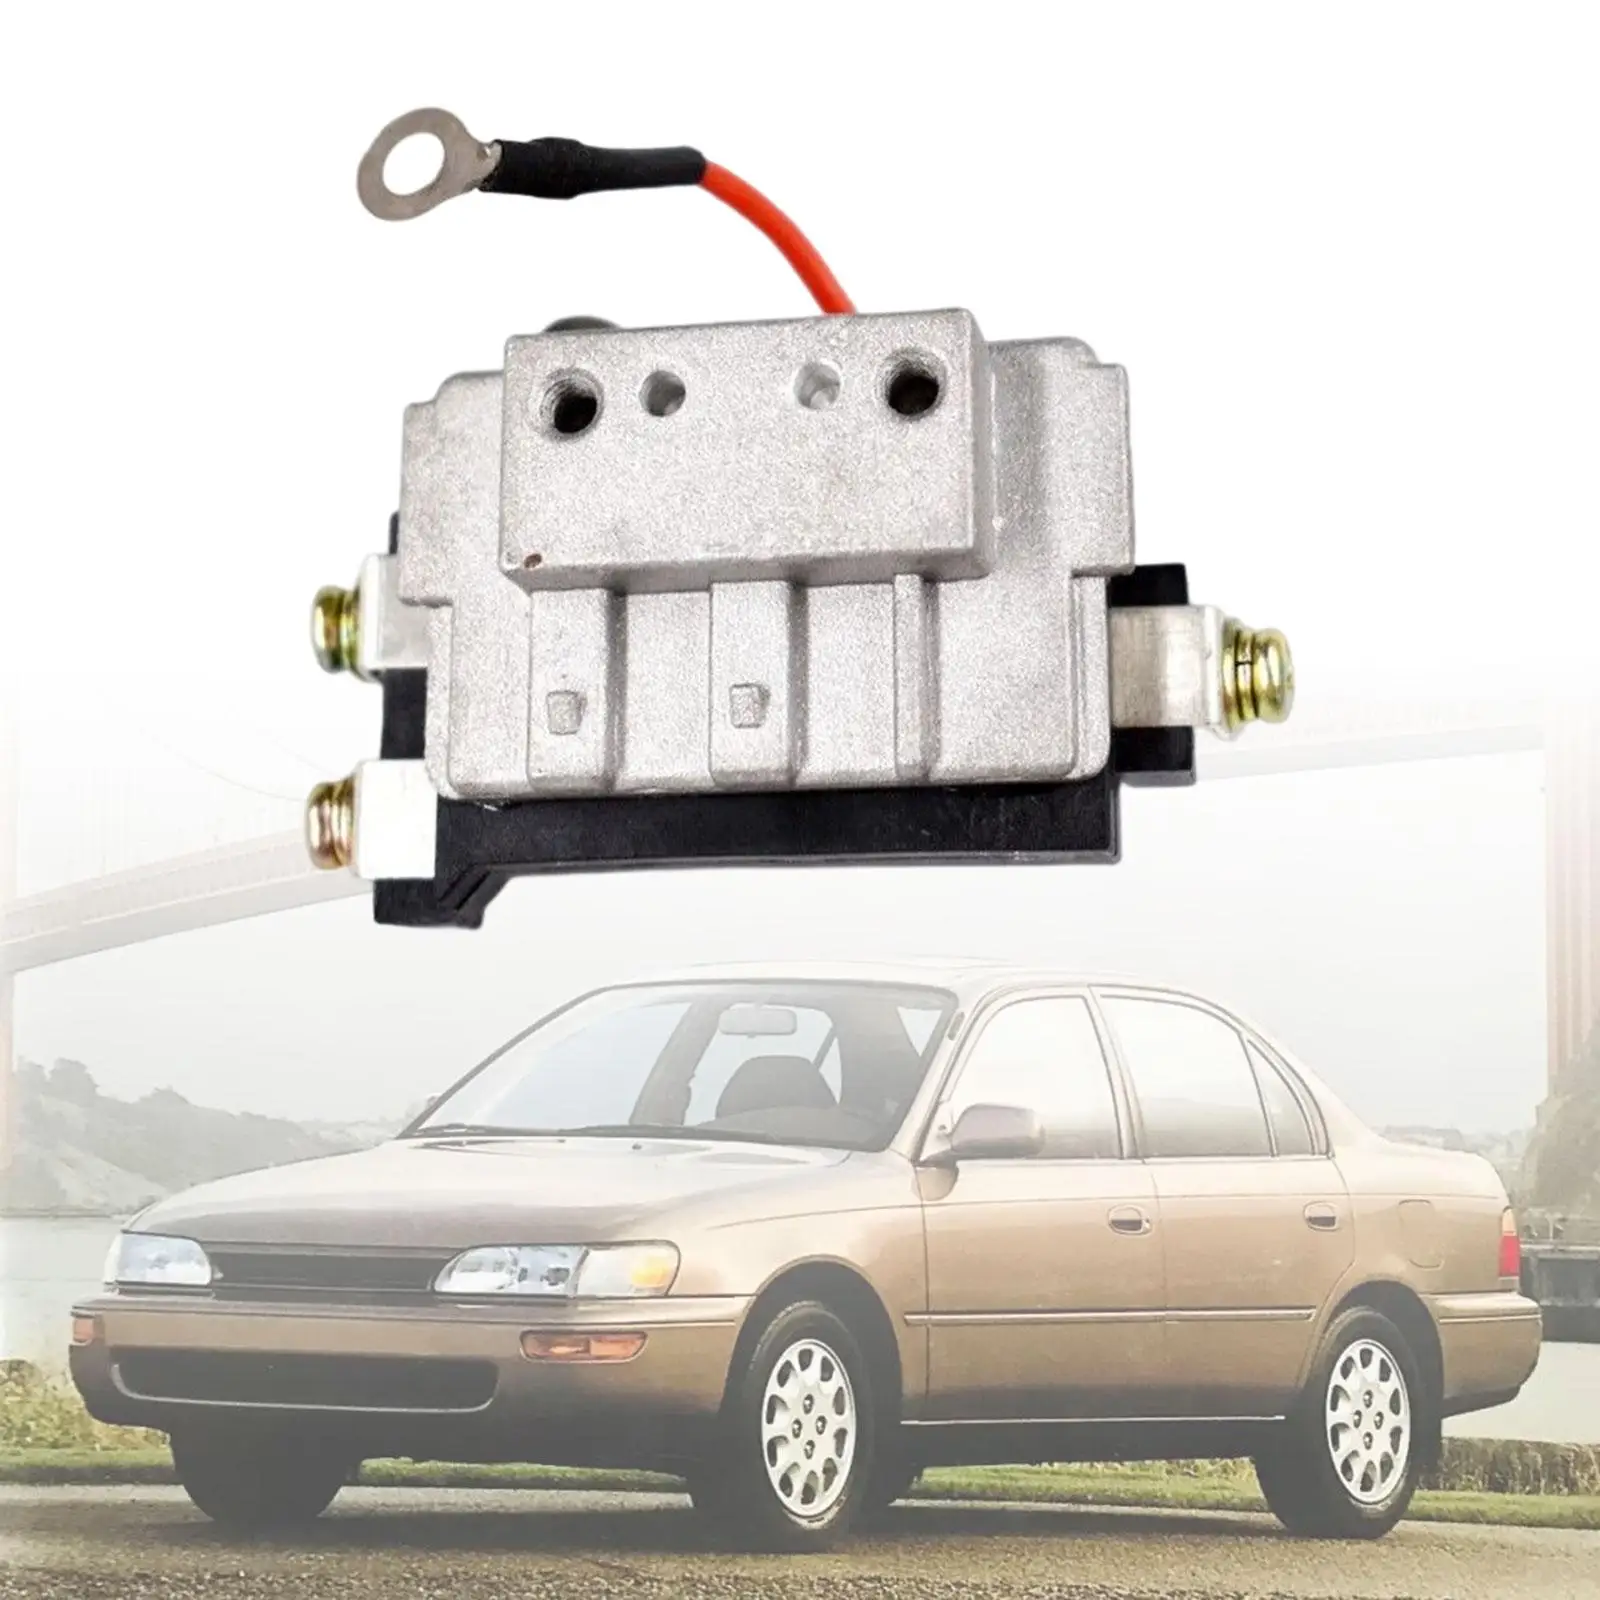 Ignition Module Replaces Easy to Install for Toyota Corolla 1993- 1995